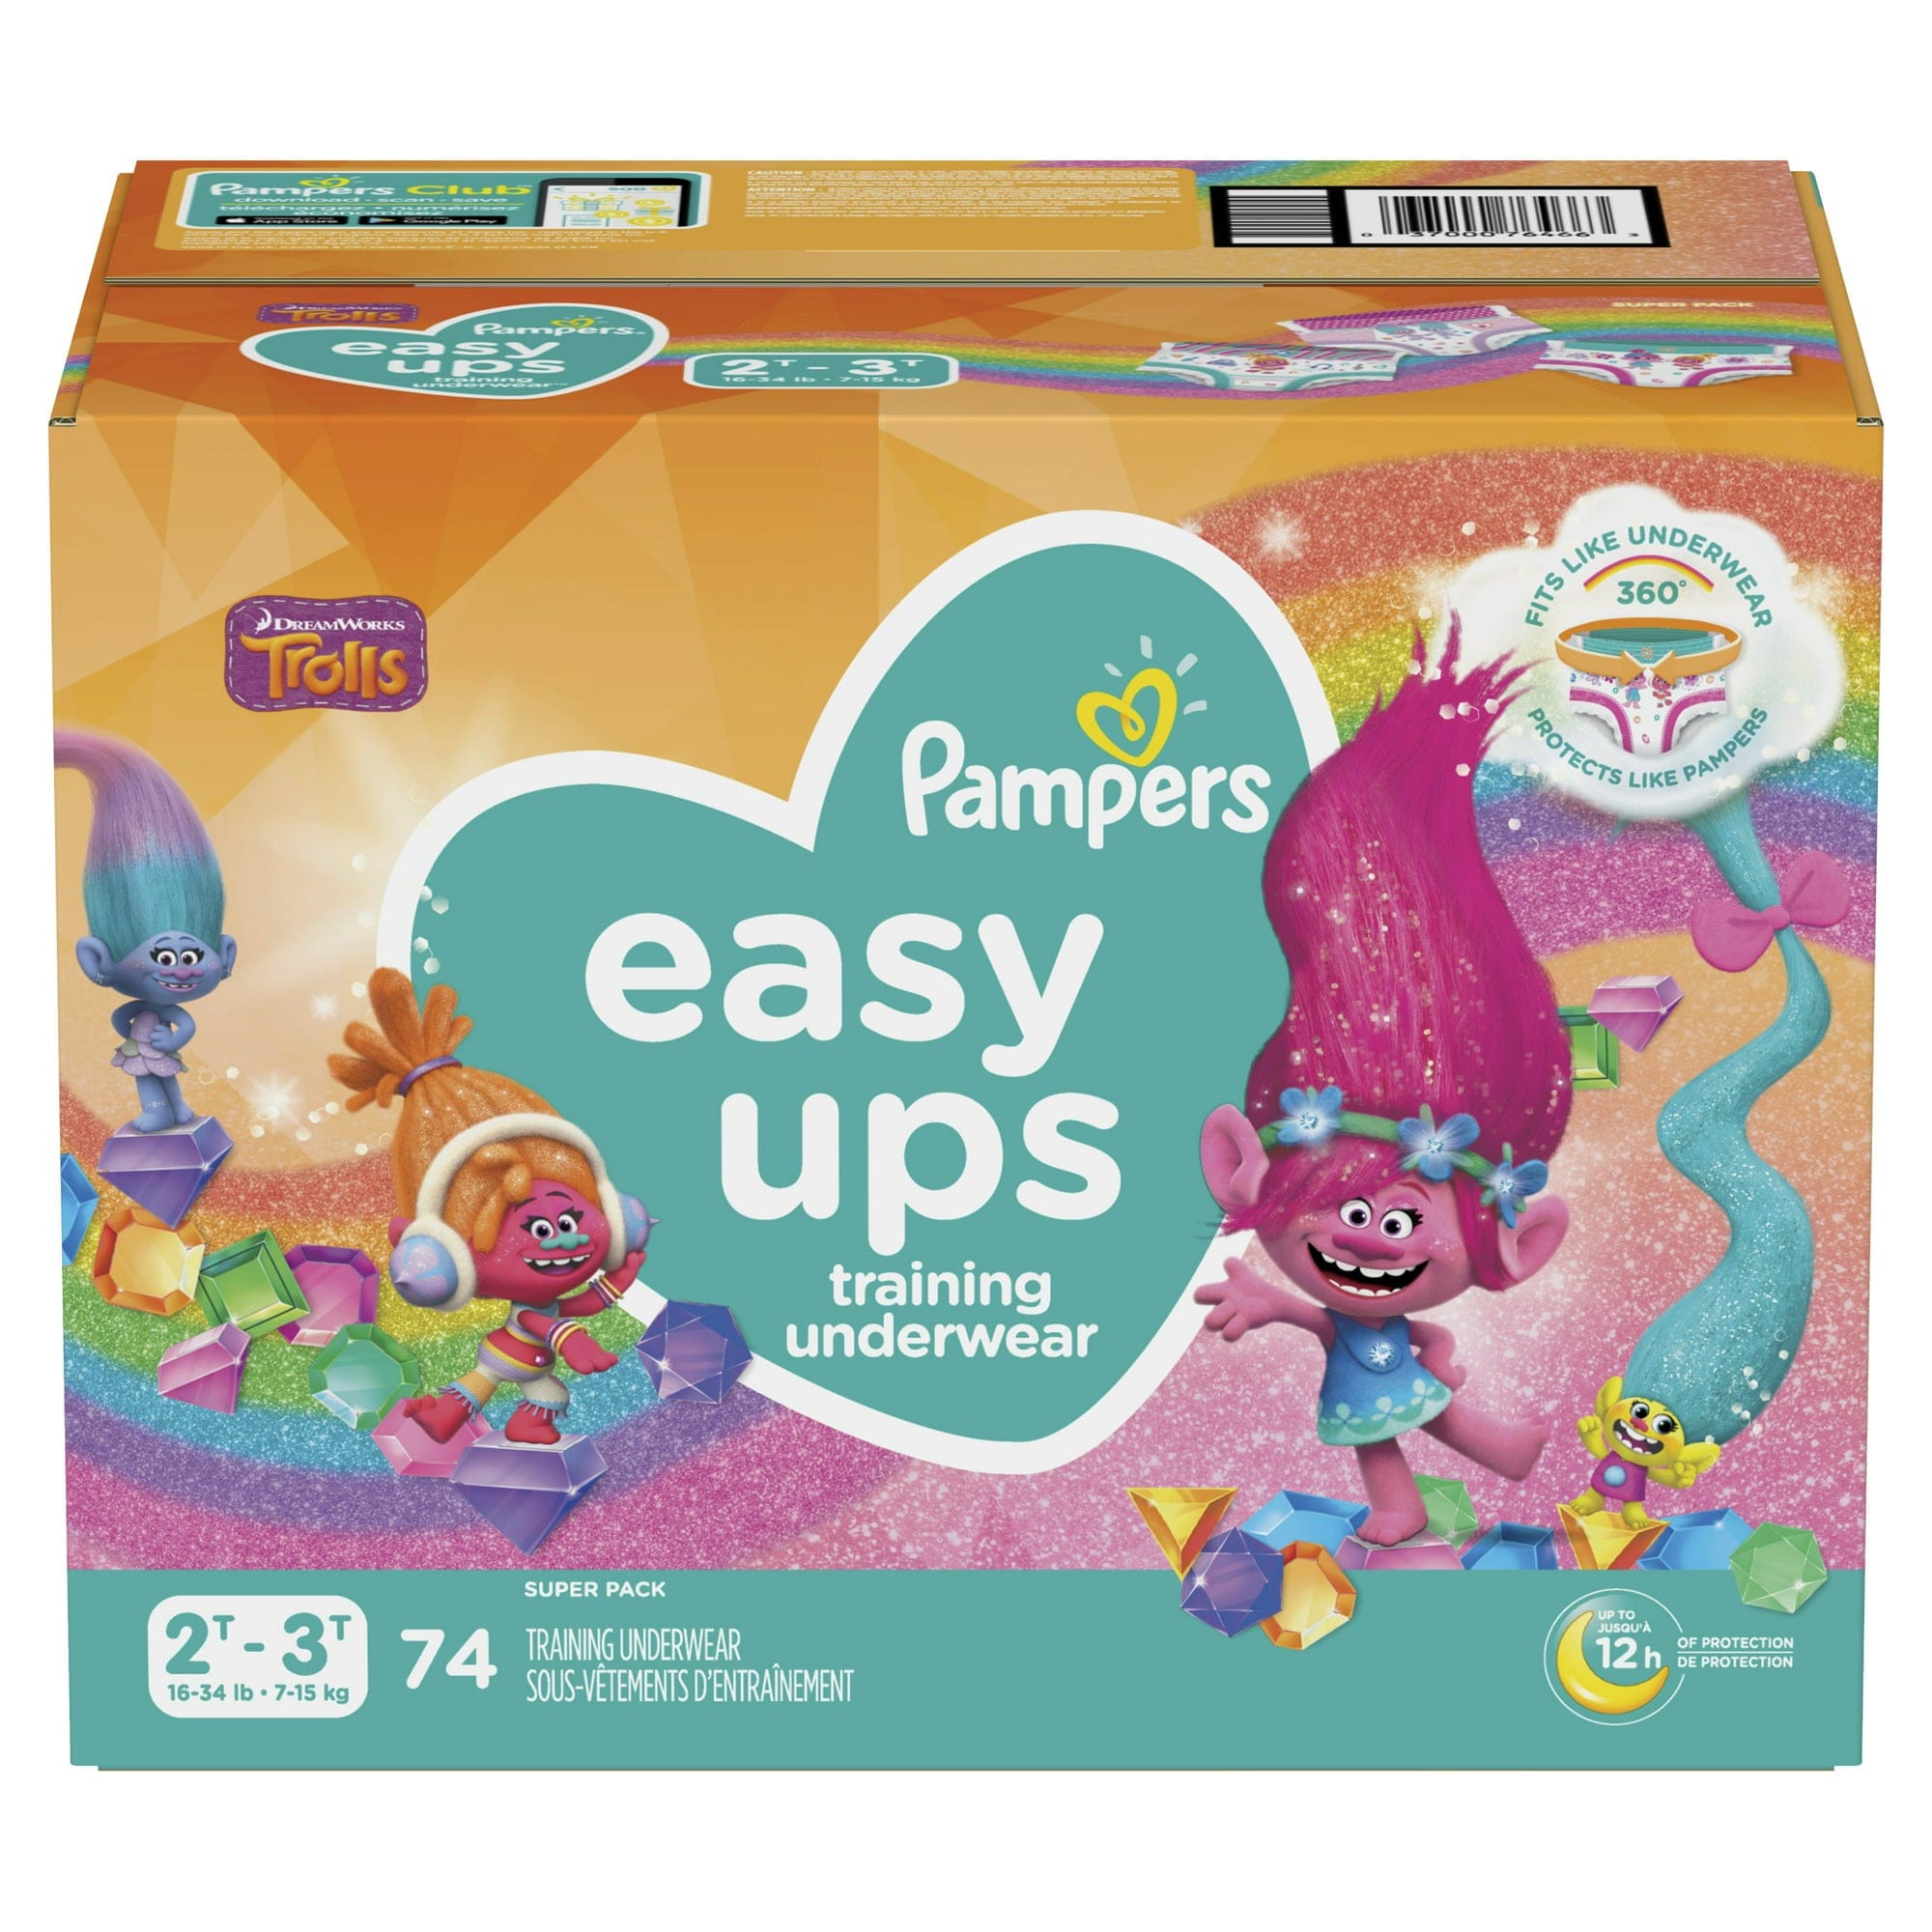 Pampers Easy Ups Training Underwear For Girls Size 4 2T-3T 74